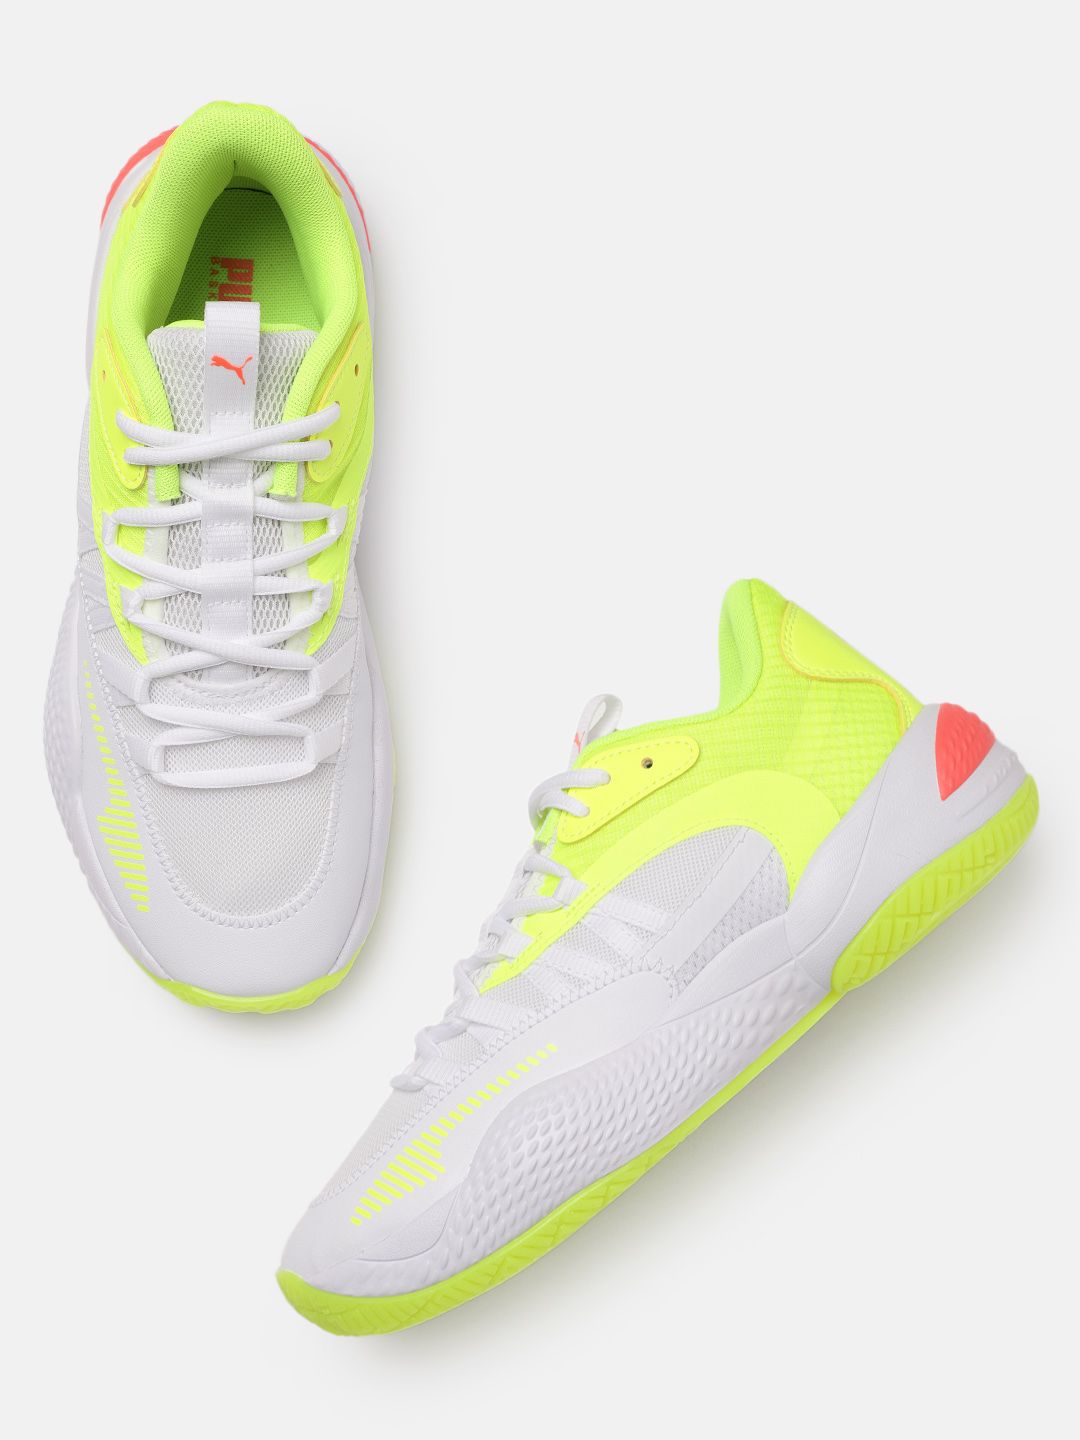 Puma Unisex White & Fluorescent Green Court Rider 2.0 Glow Stick Basketball Shoes Price in India